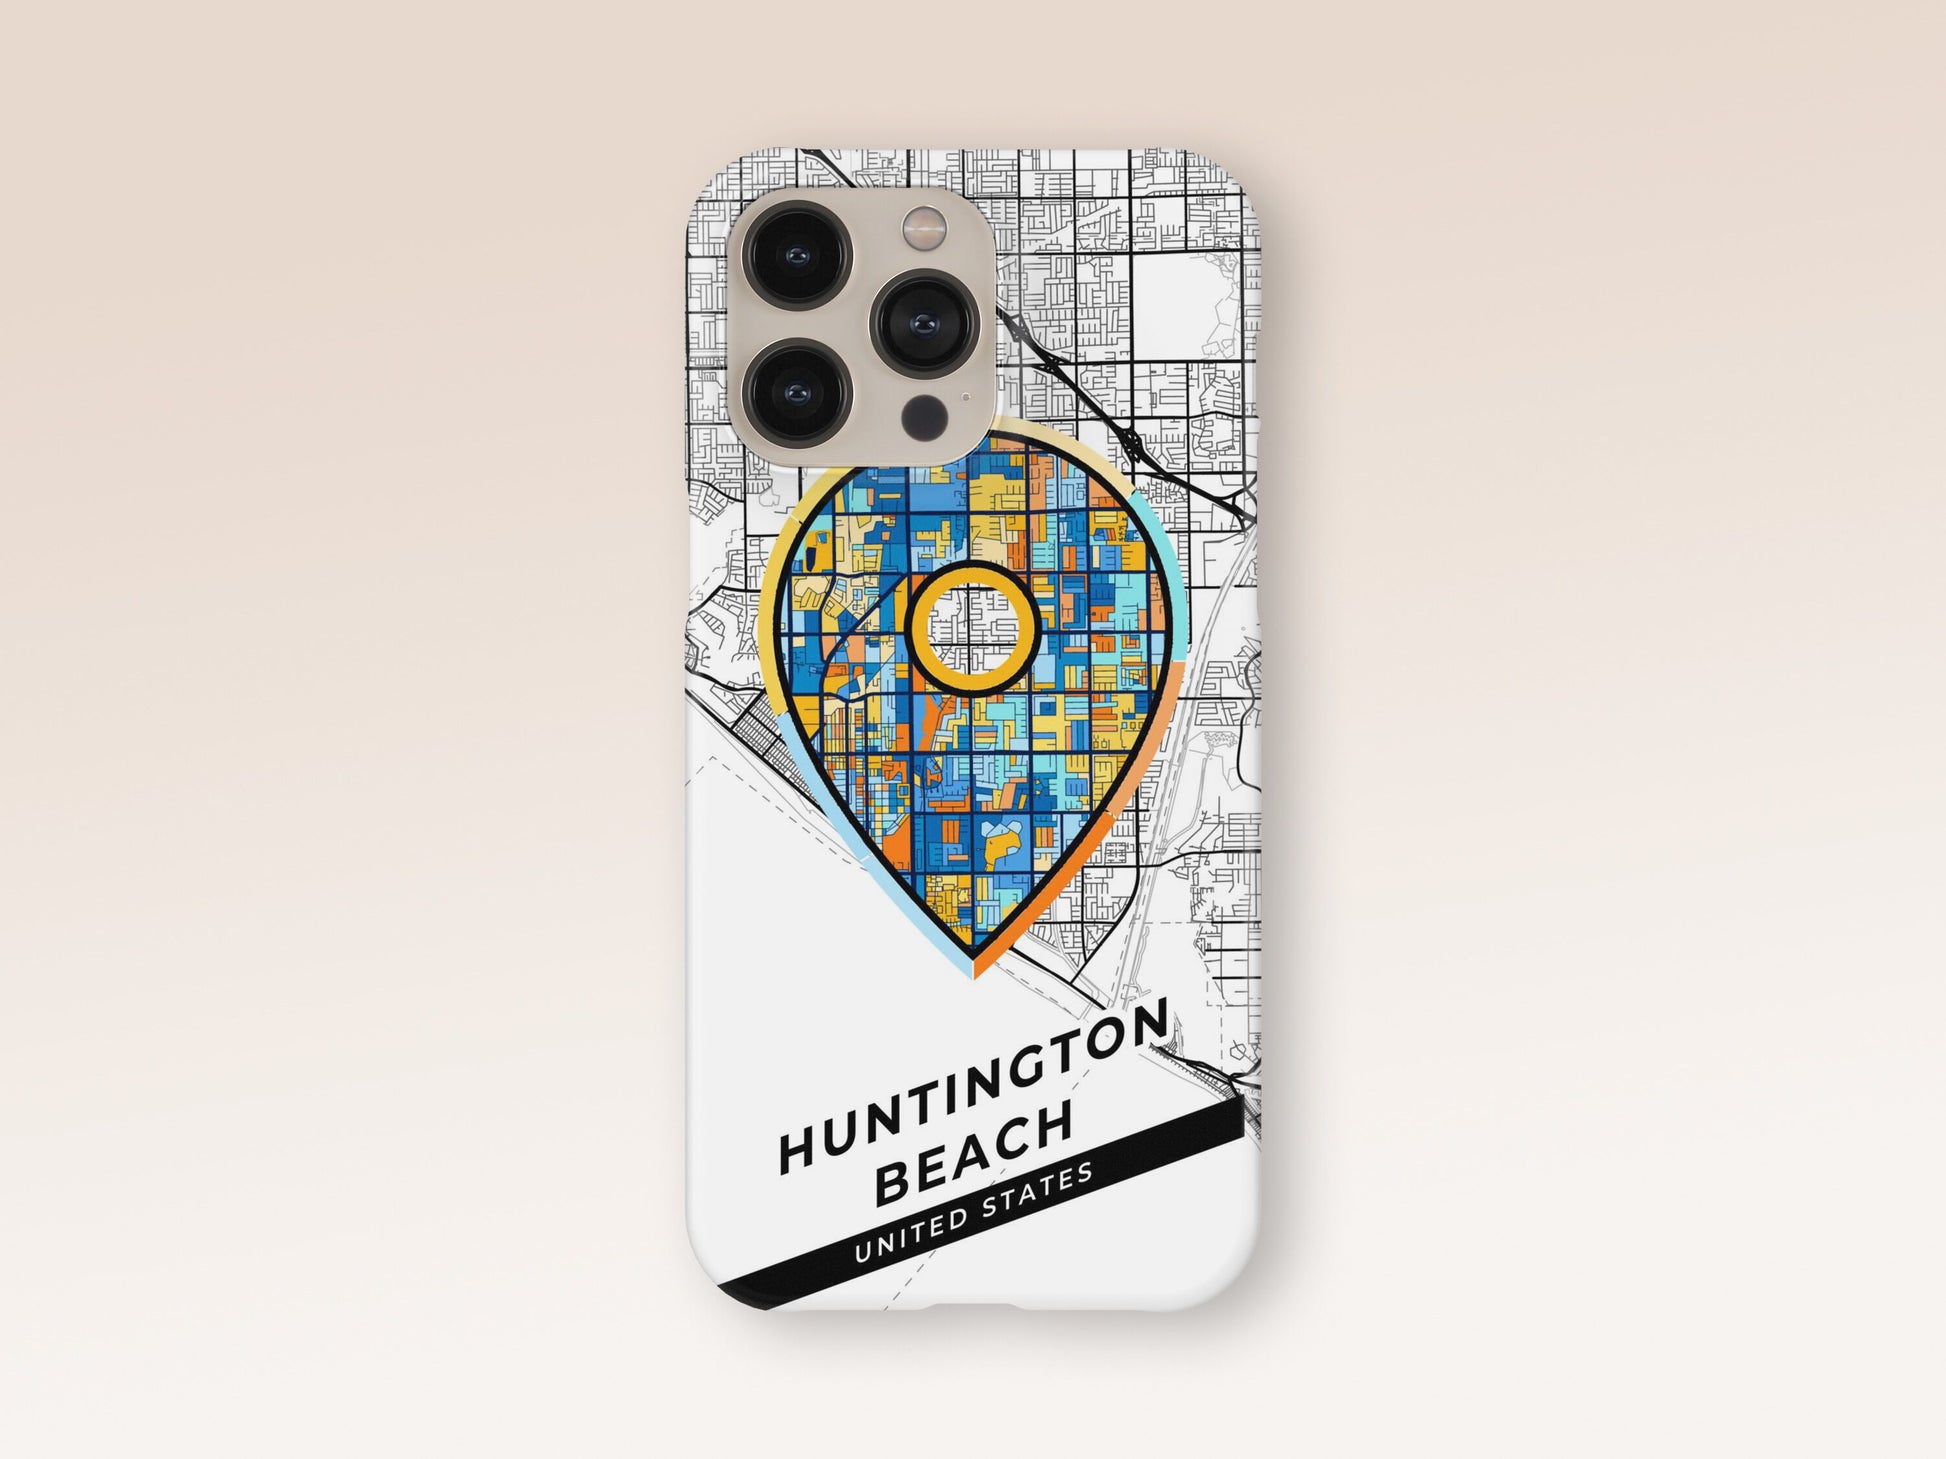 Huntington Beach California slim phone case with colorful icon. Birthday, wedding or housewarming gift. Couple match cases. 1